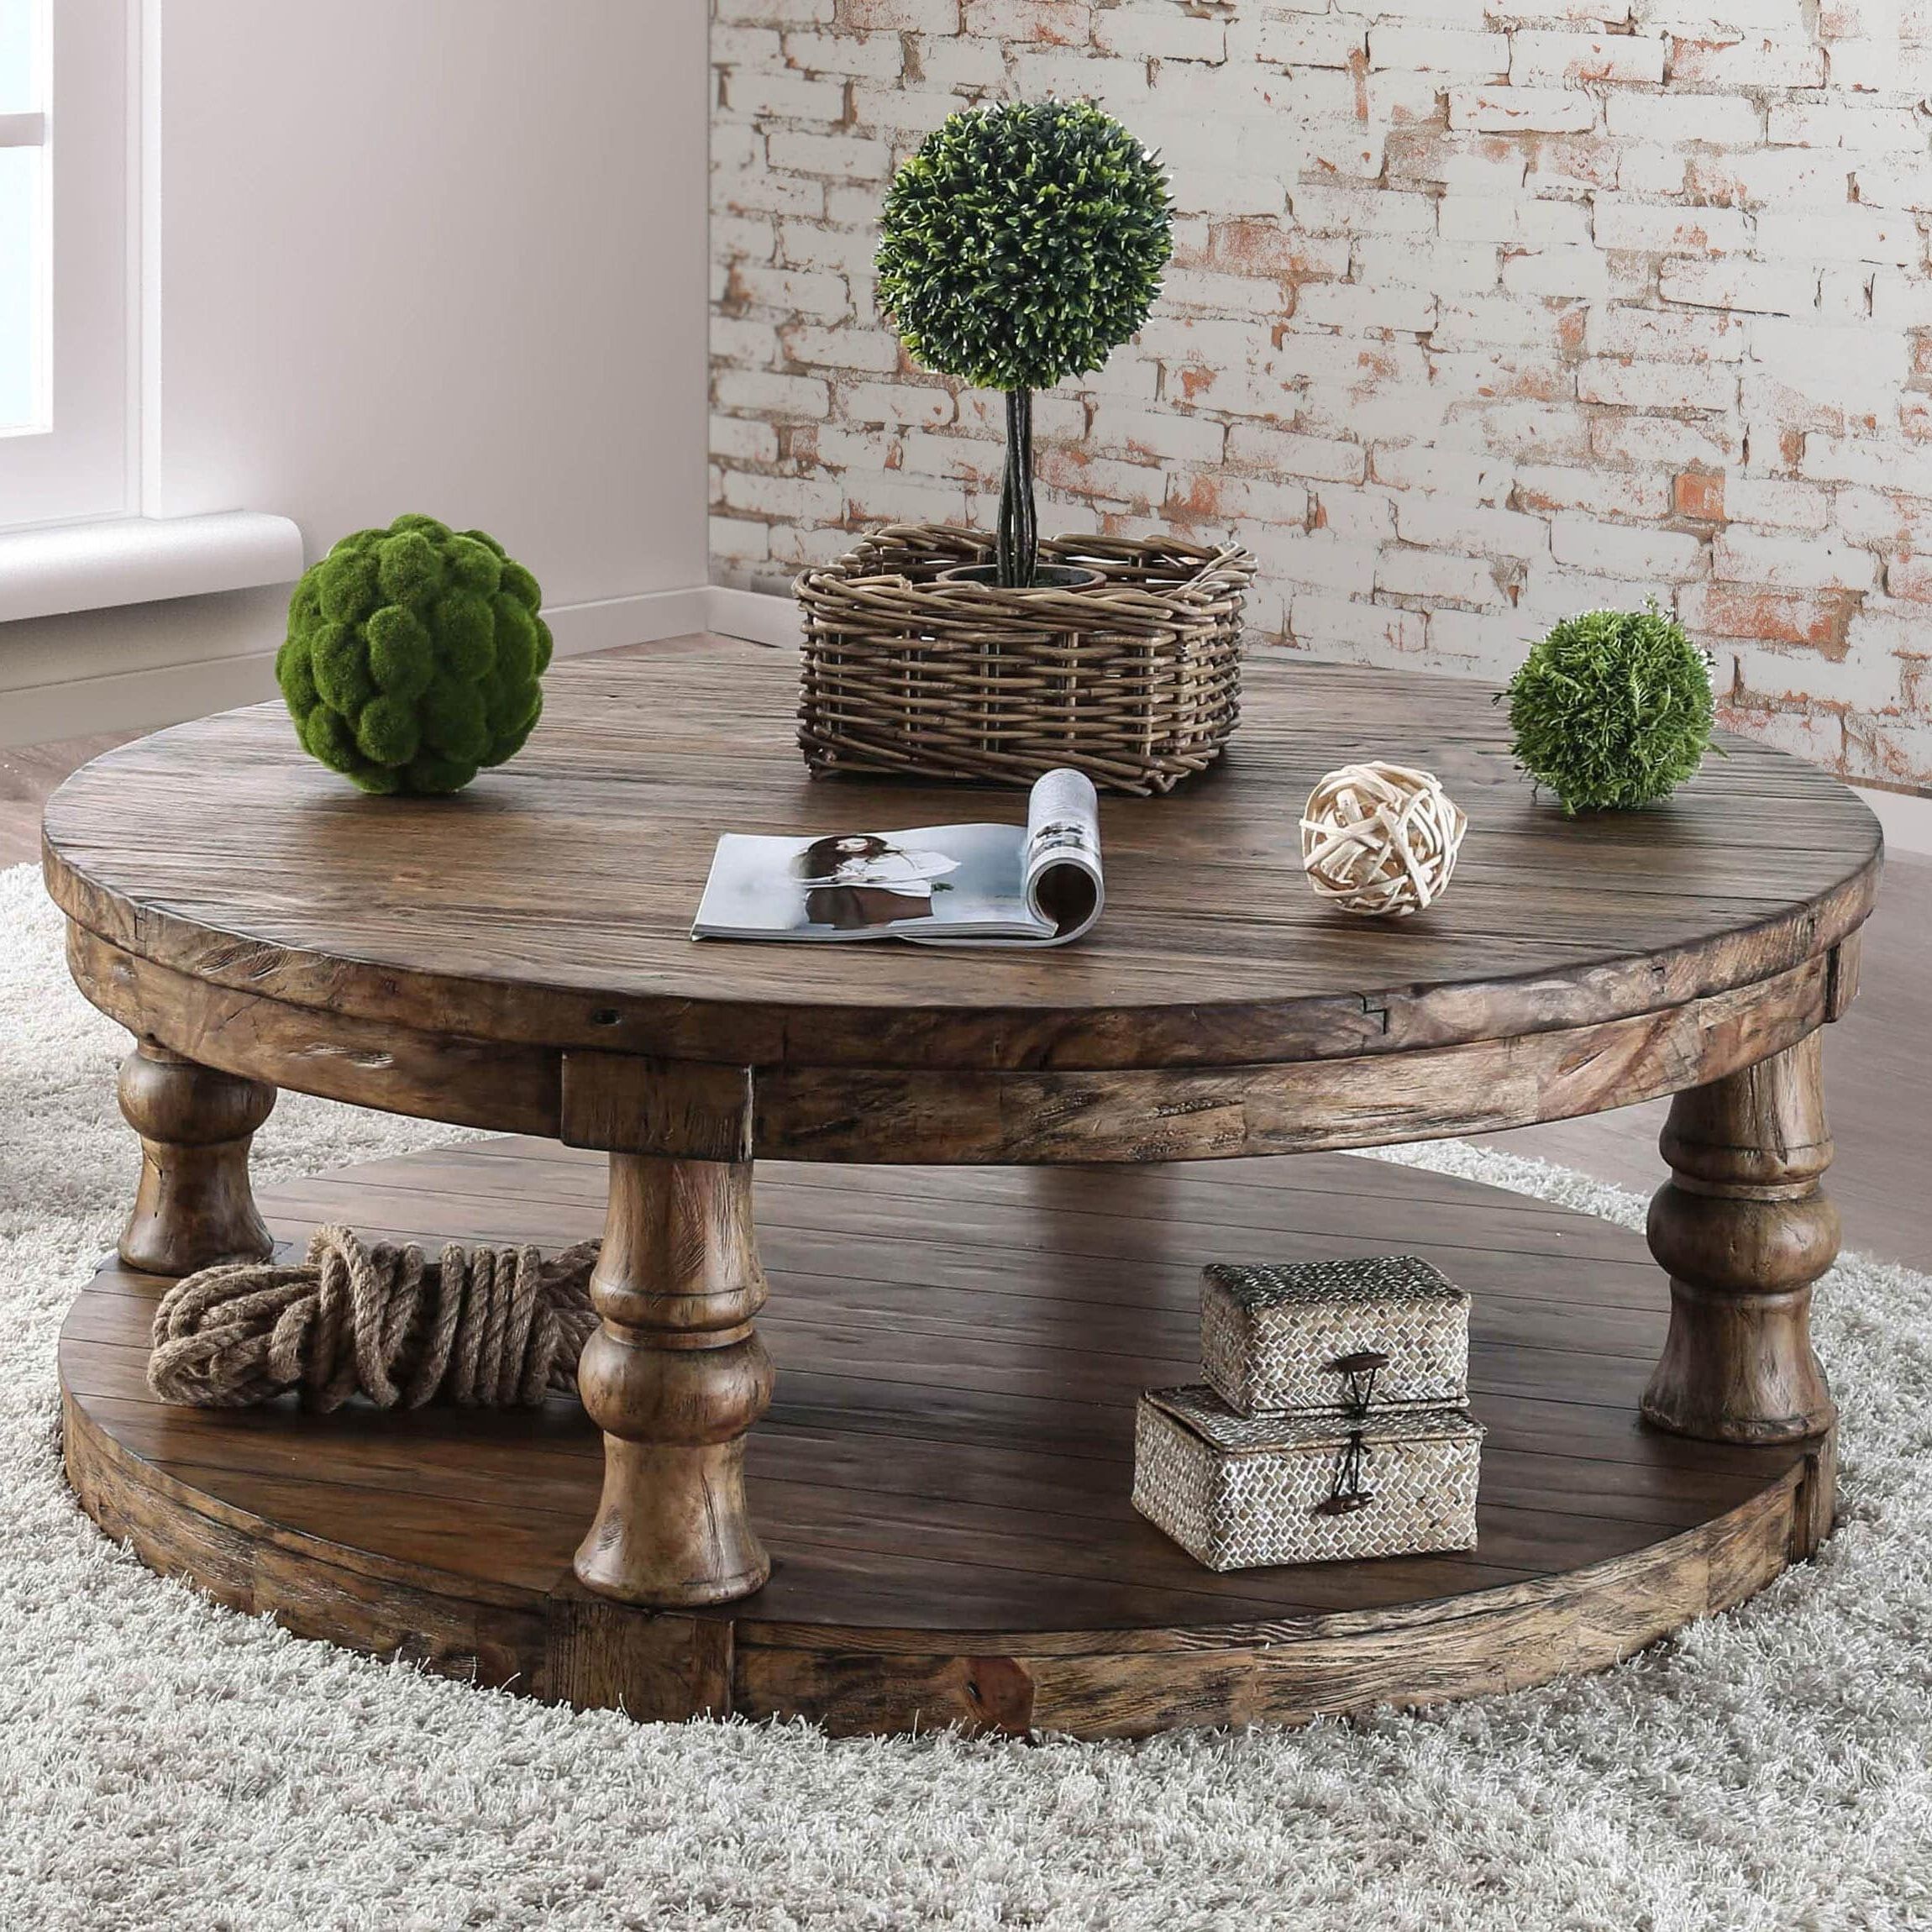 Round Rustic Coffee Table Sets – Rustic Coffee Tables That You Need To In Brown Rustic Coffee Tables (View 17 of 20)